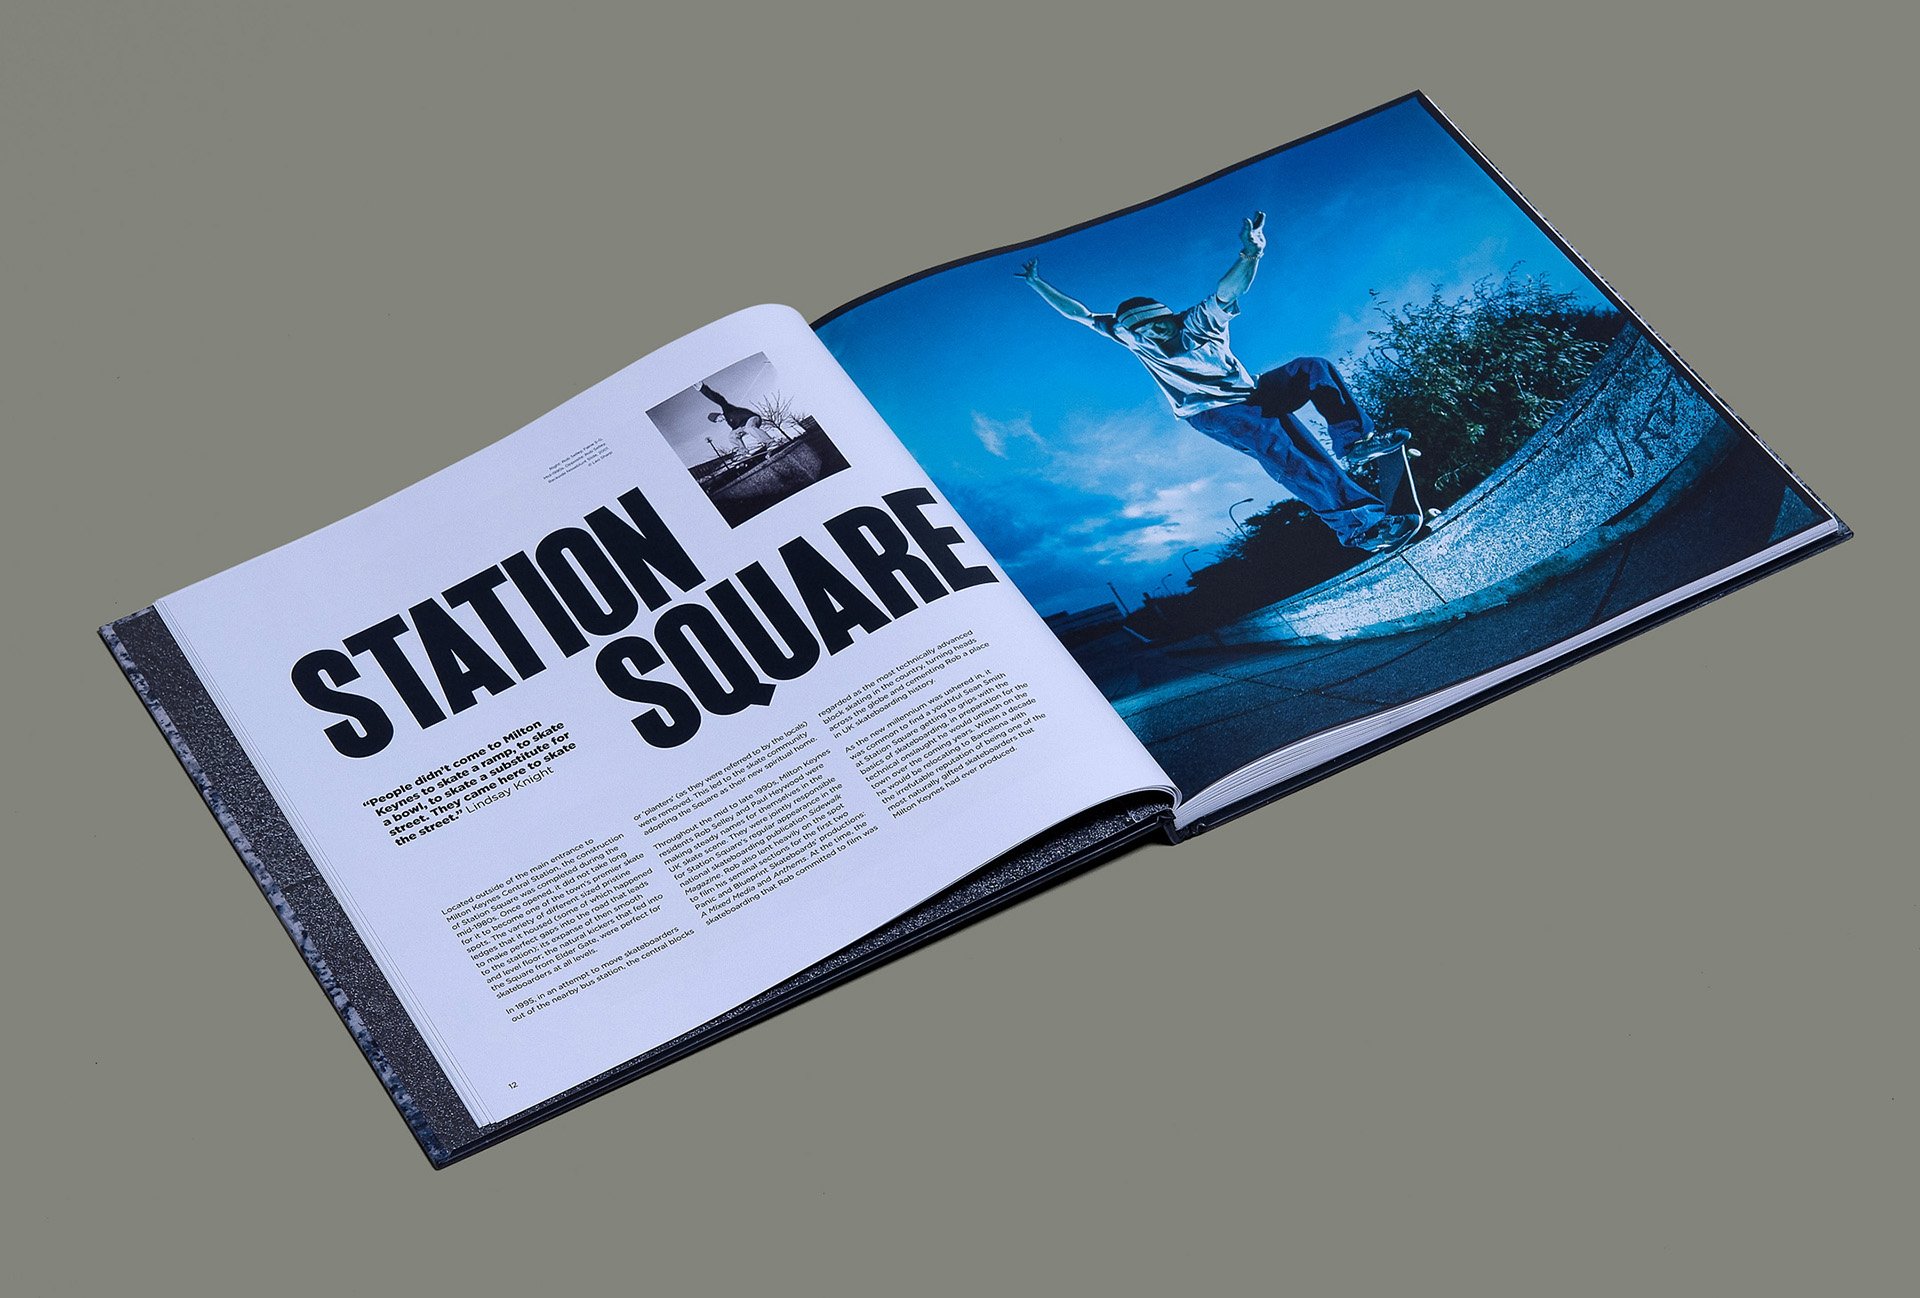 New book charting the history of skateboarding in MK